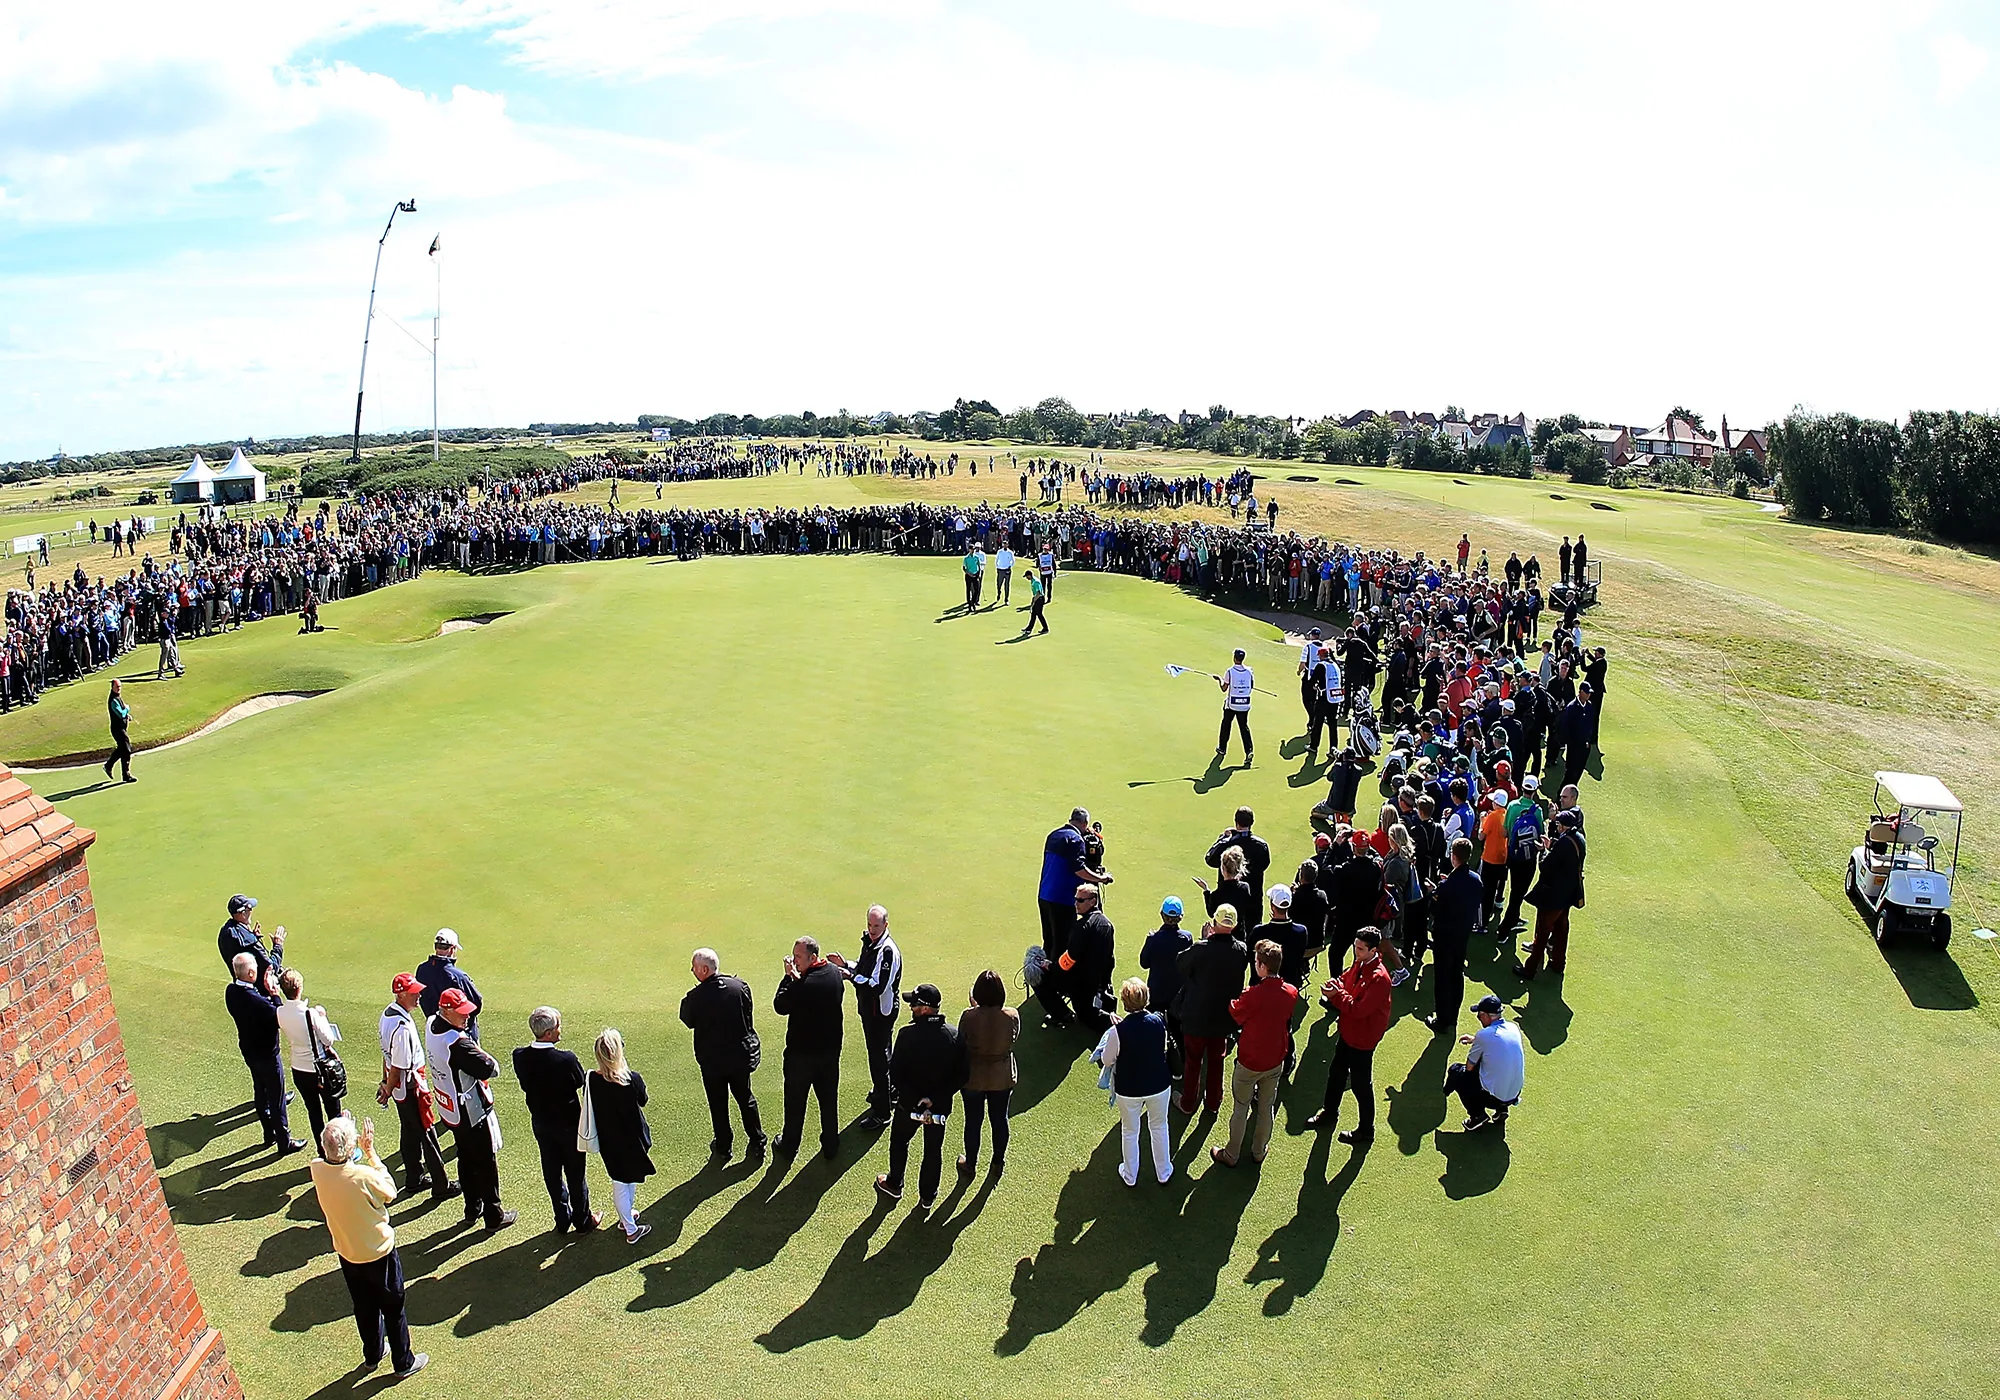 It's a huge golf tournament – but not as we know it